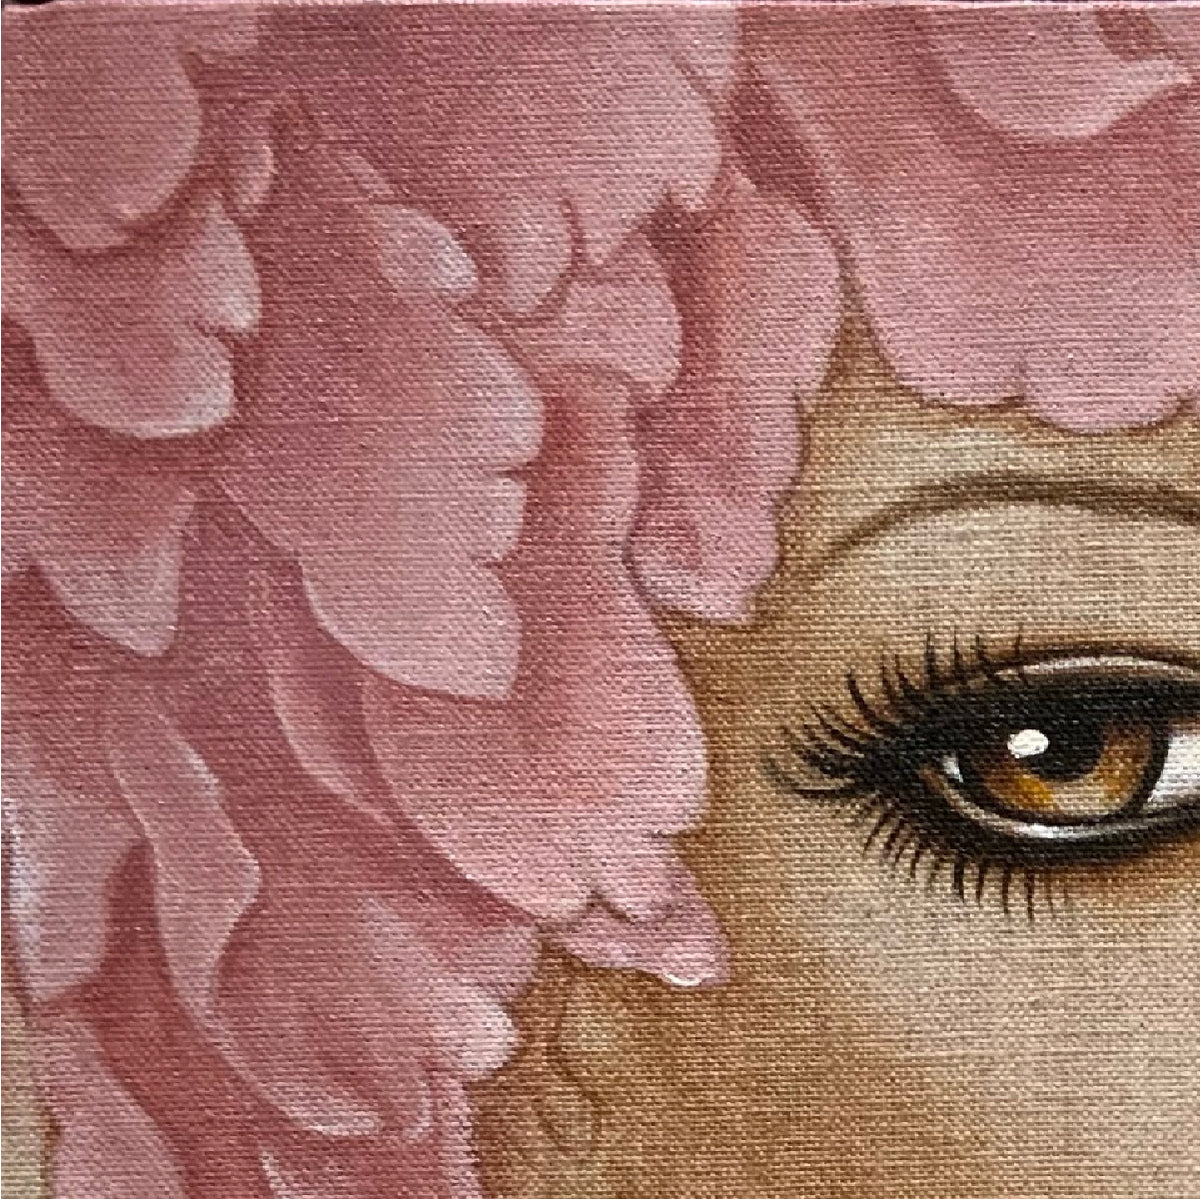 cropped view of a painting of a woman's face - she has large eyes and lips and is wearing a feather hat